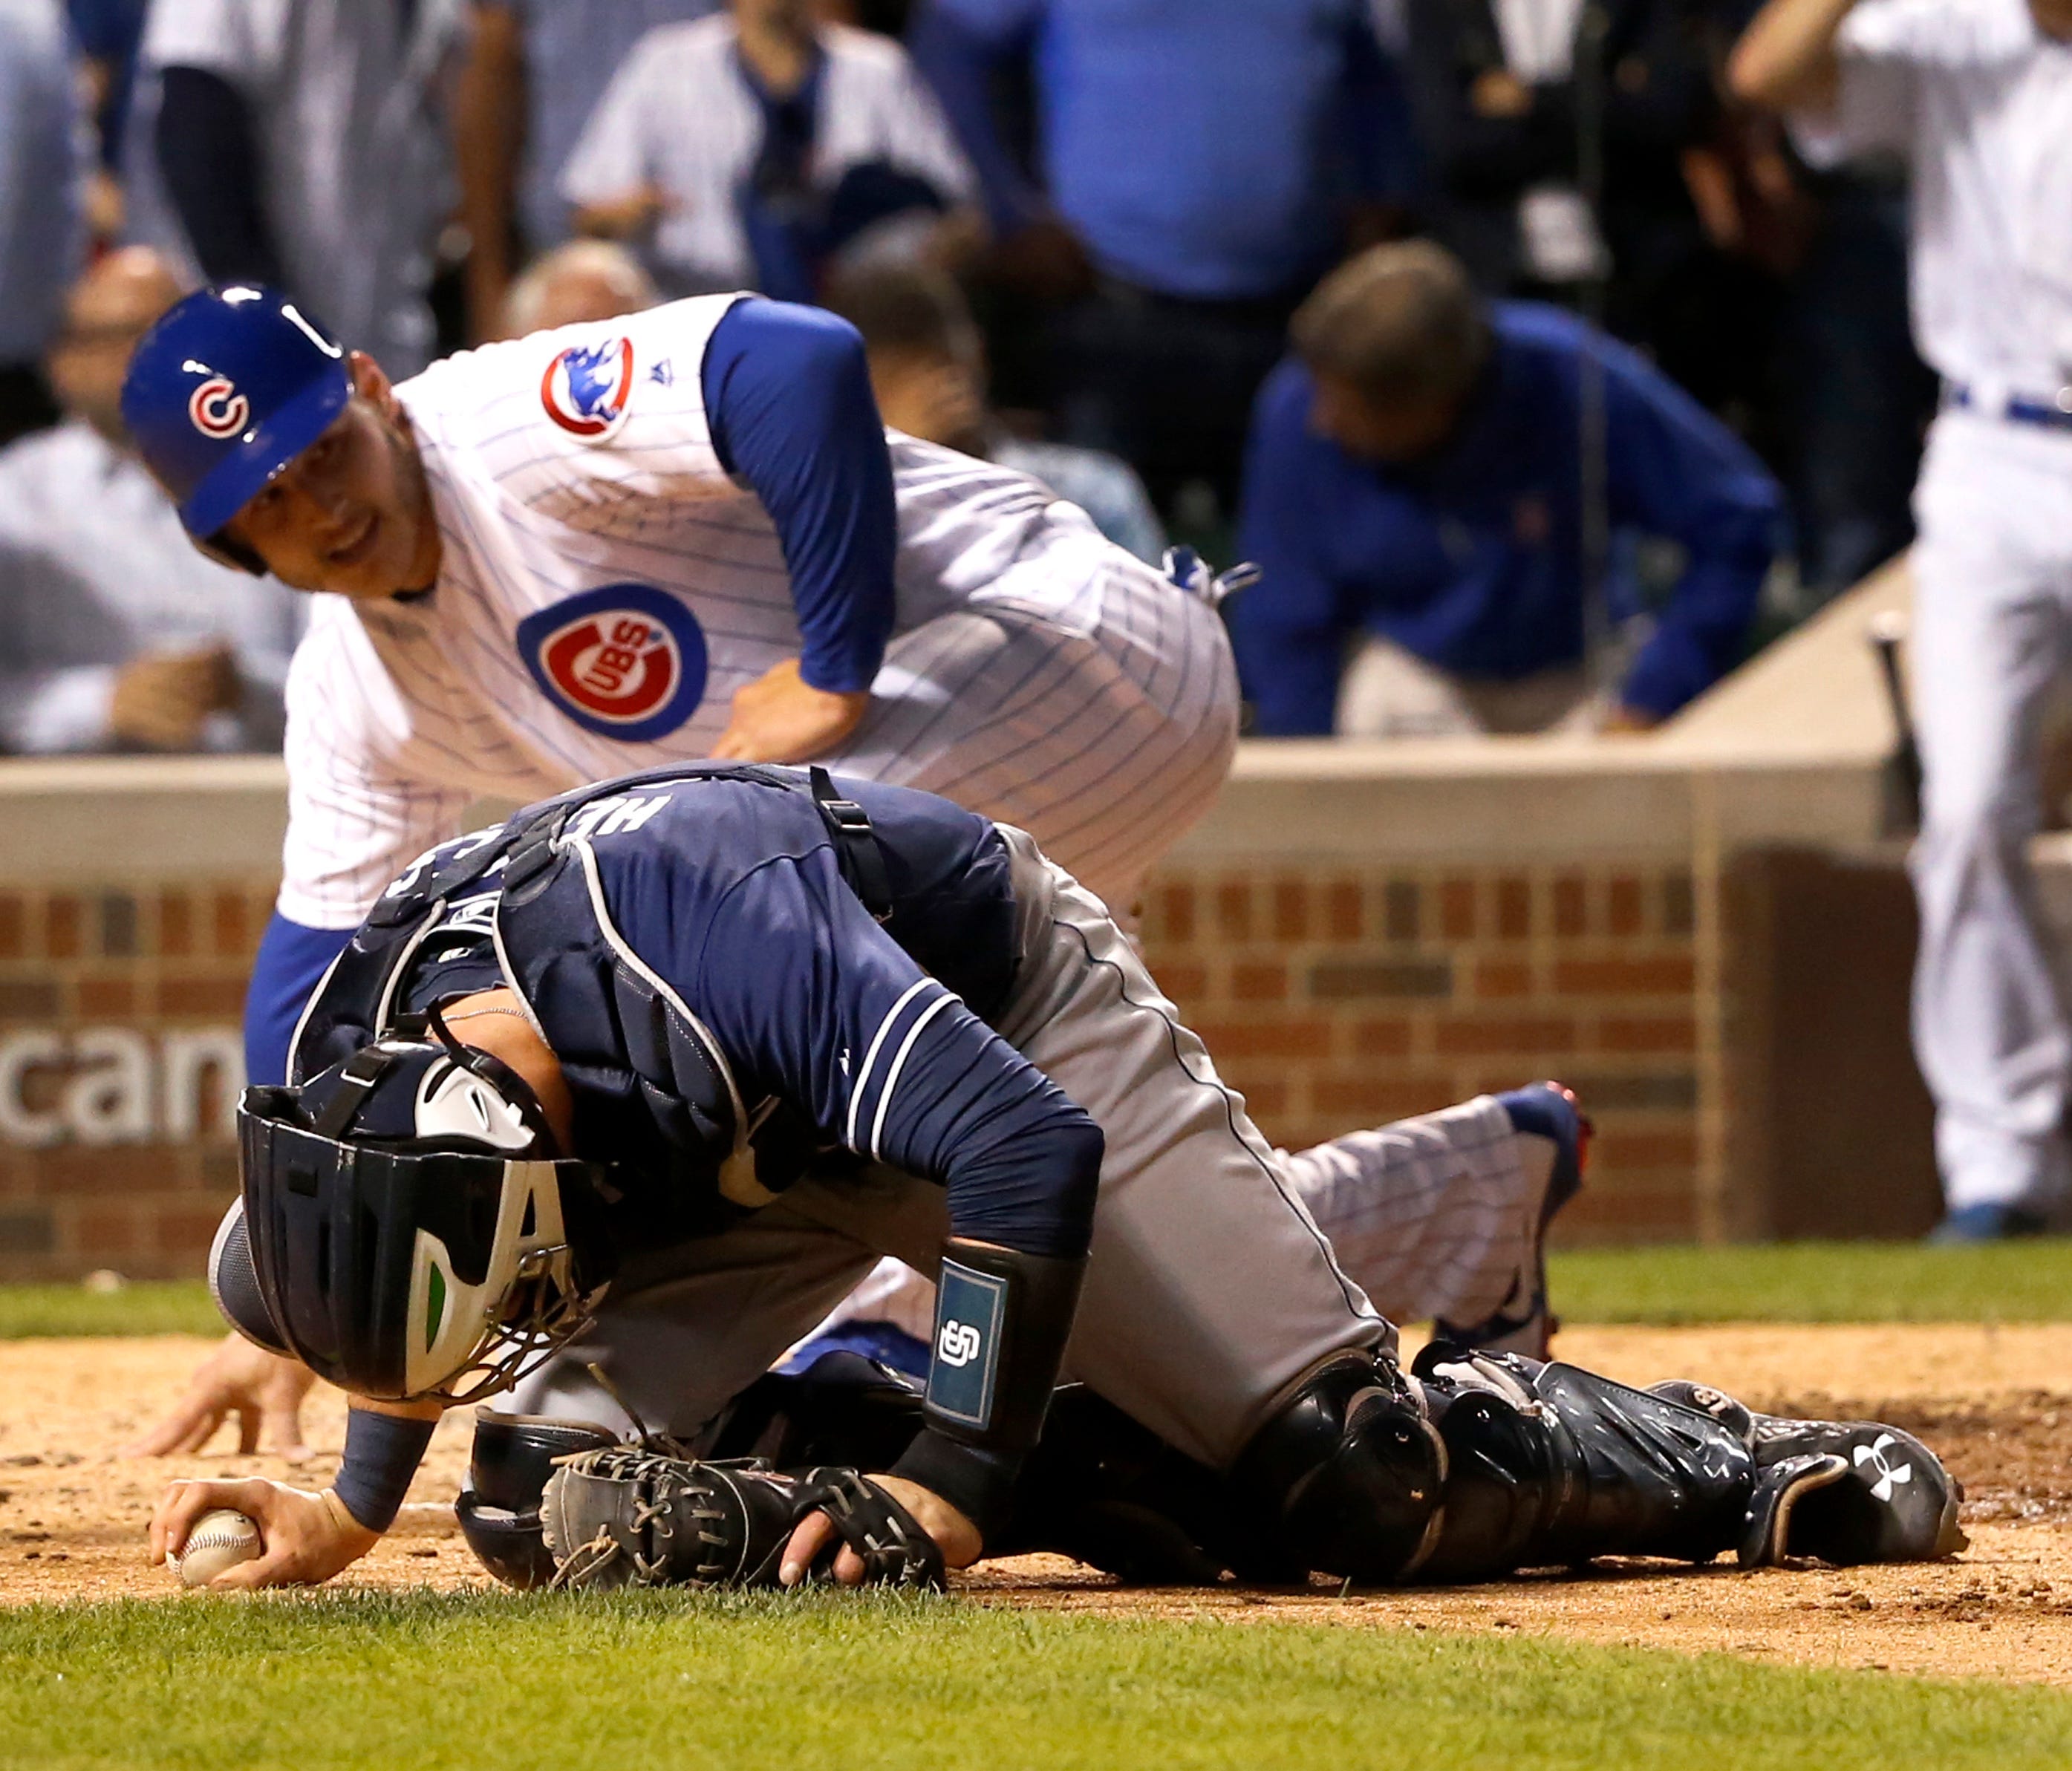 Padres catcher Austin Hedges was injured after tagging out the Cubs' Anthony Rizzo during a collision at home on Monday.